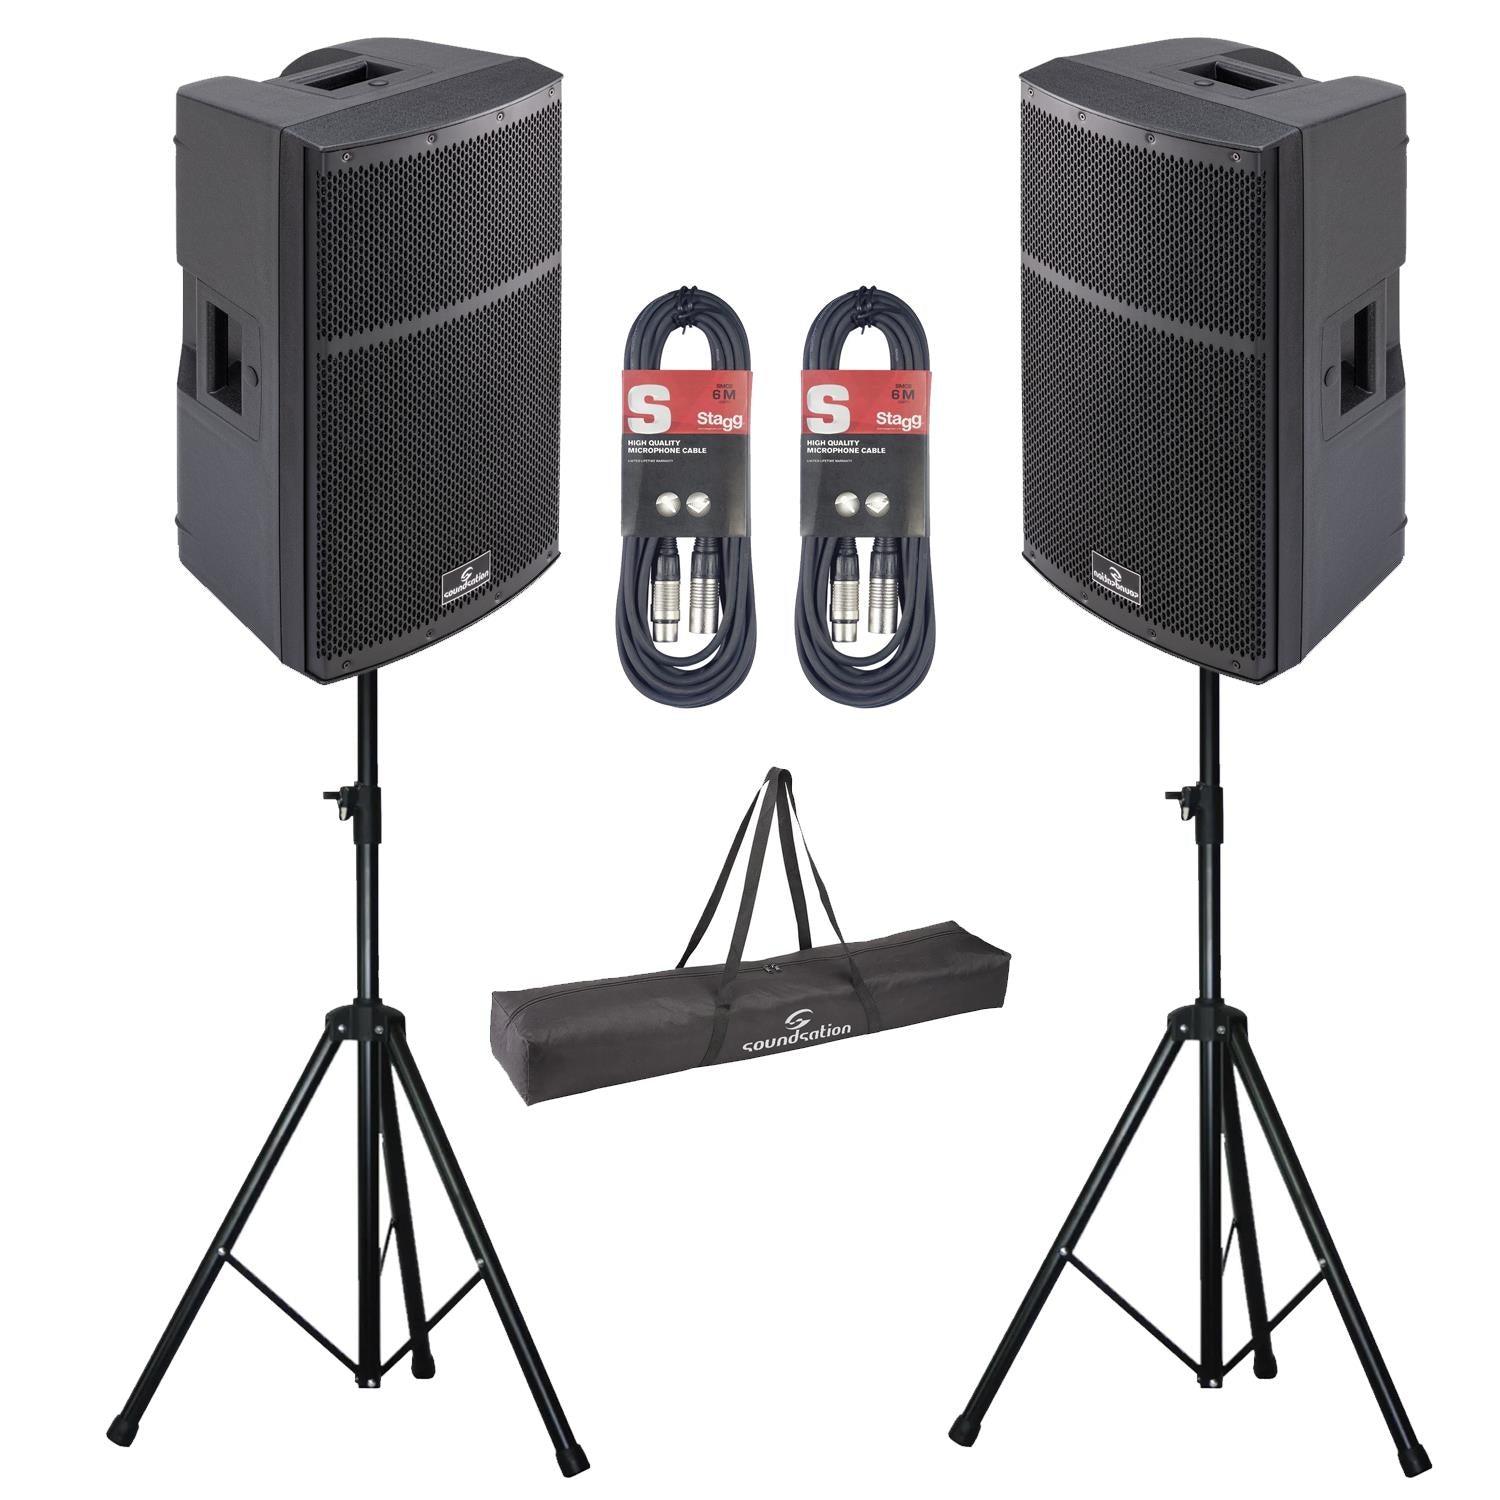 2 x Soundsation Hyper-Pro 12 Plus 12" Active Speaker with Stands and Cables - DY Pro Audio